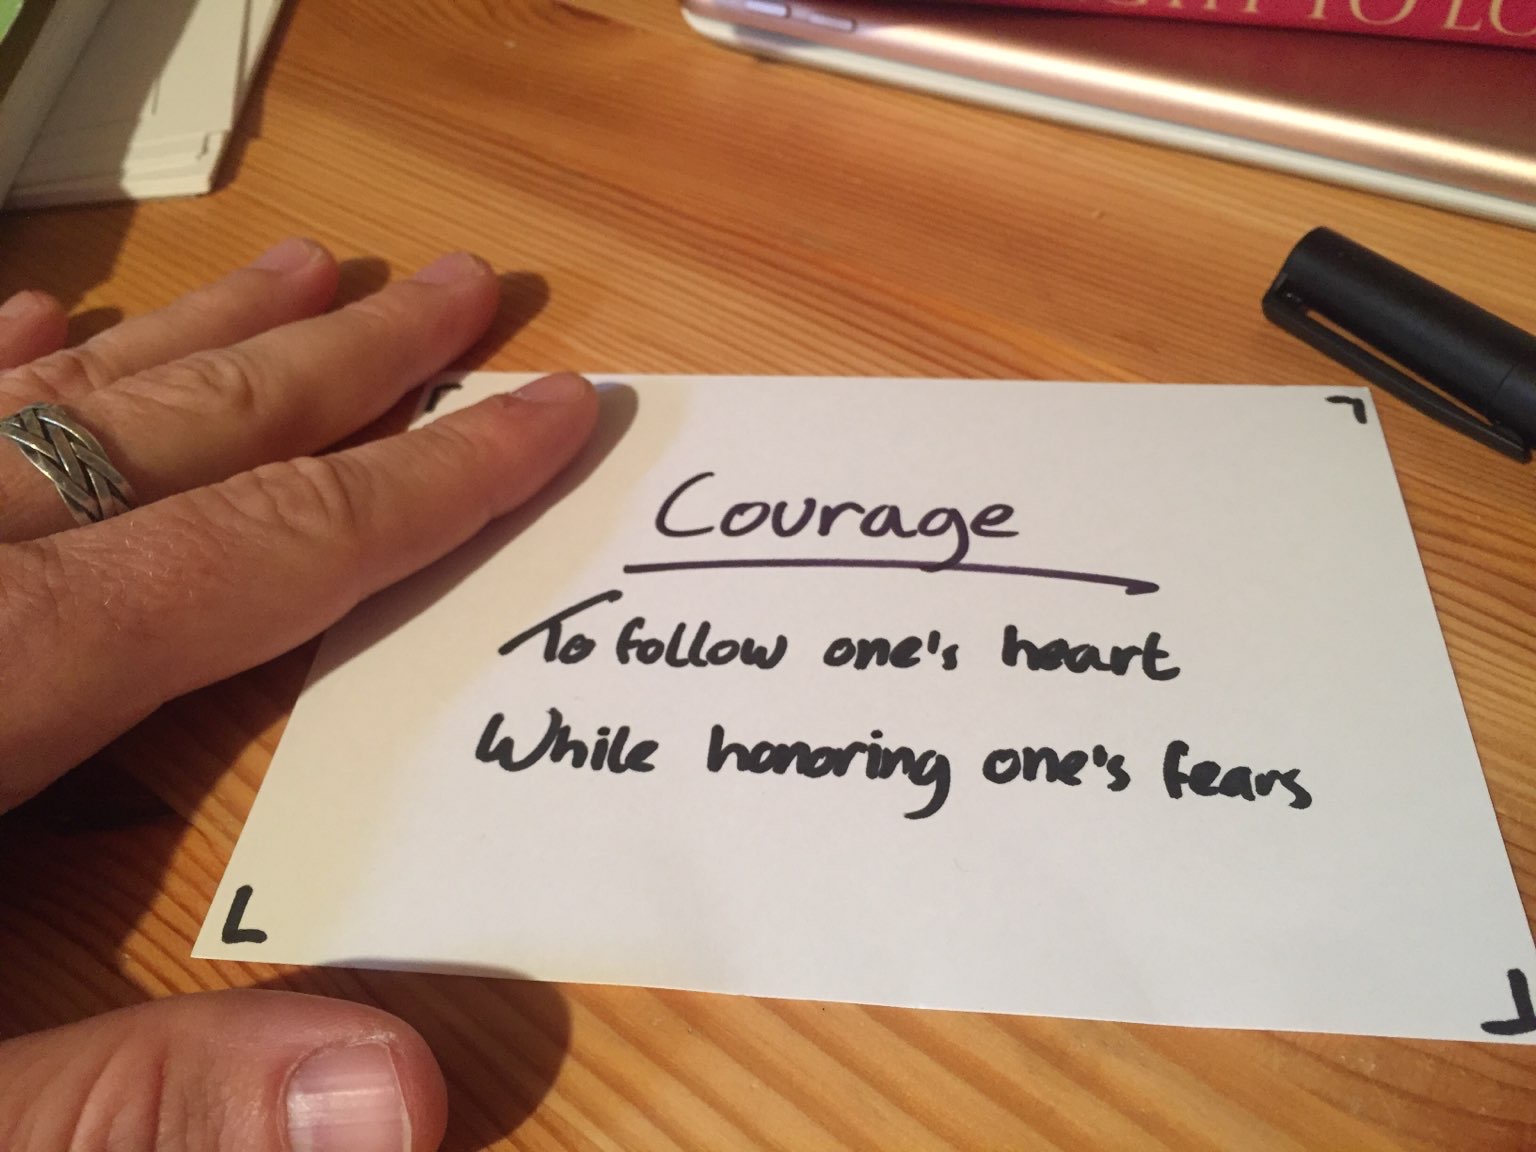 Musing: Is courage another word for support?